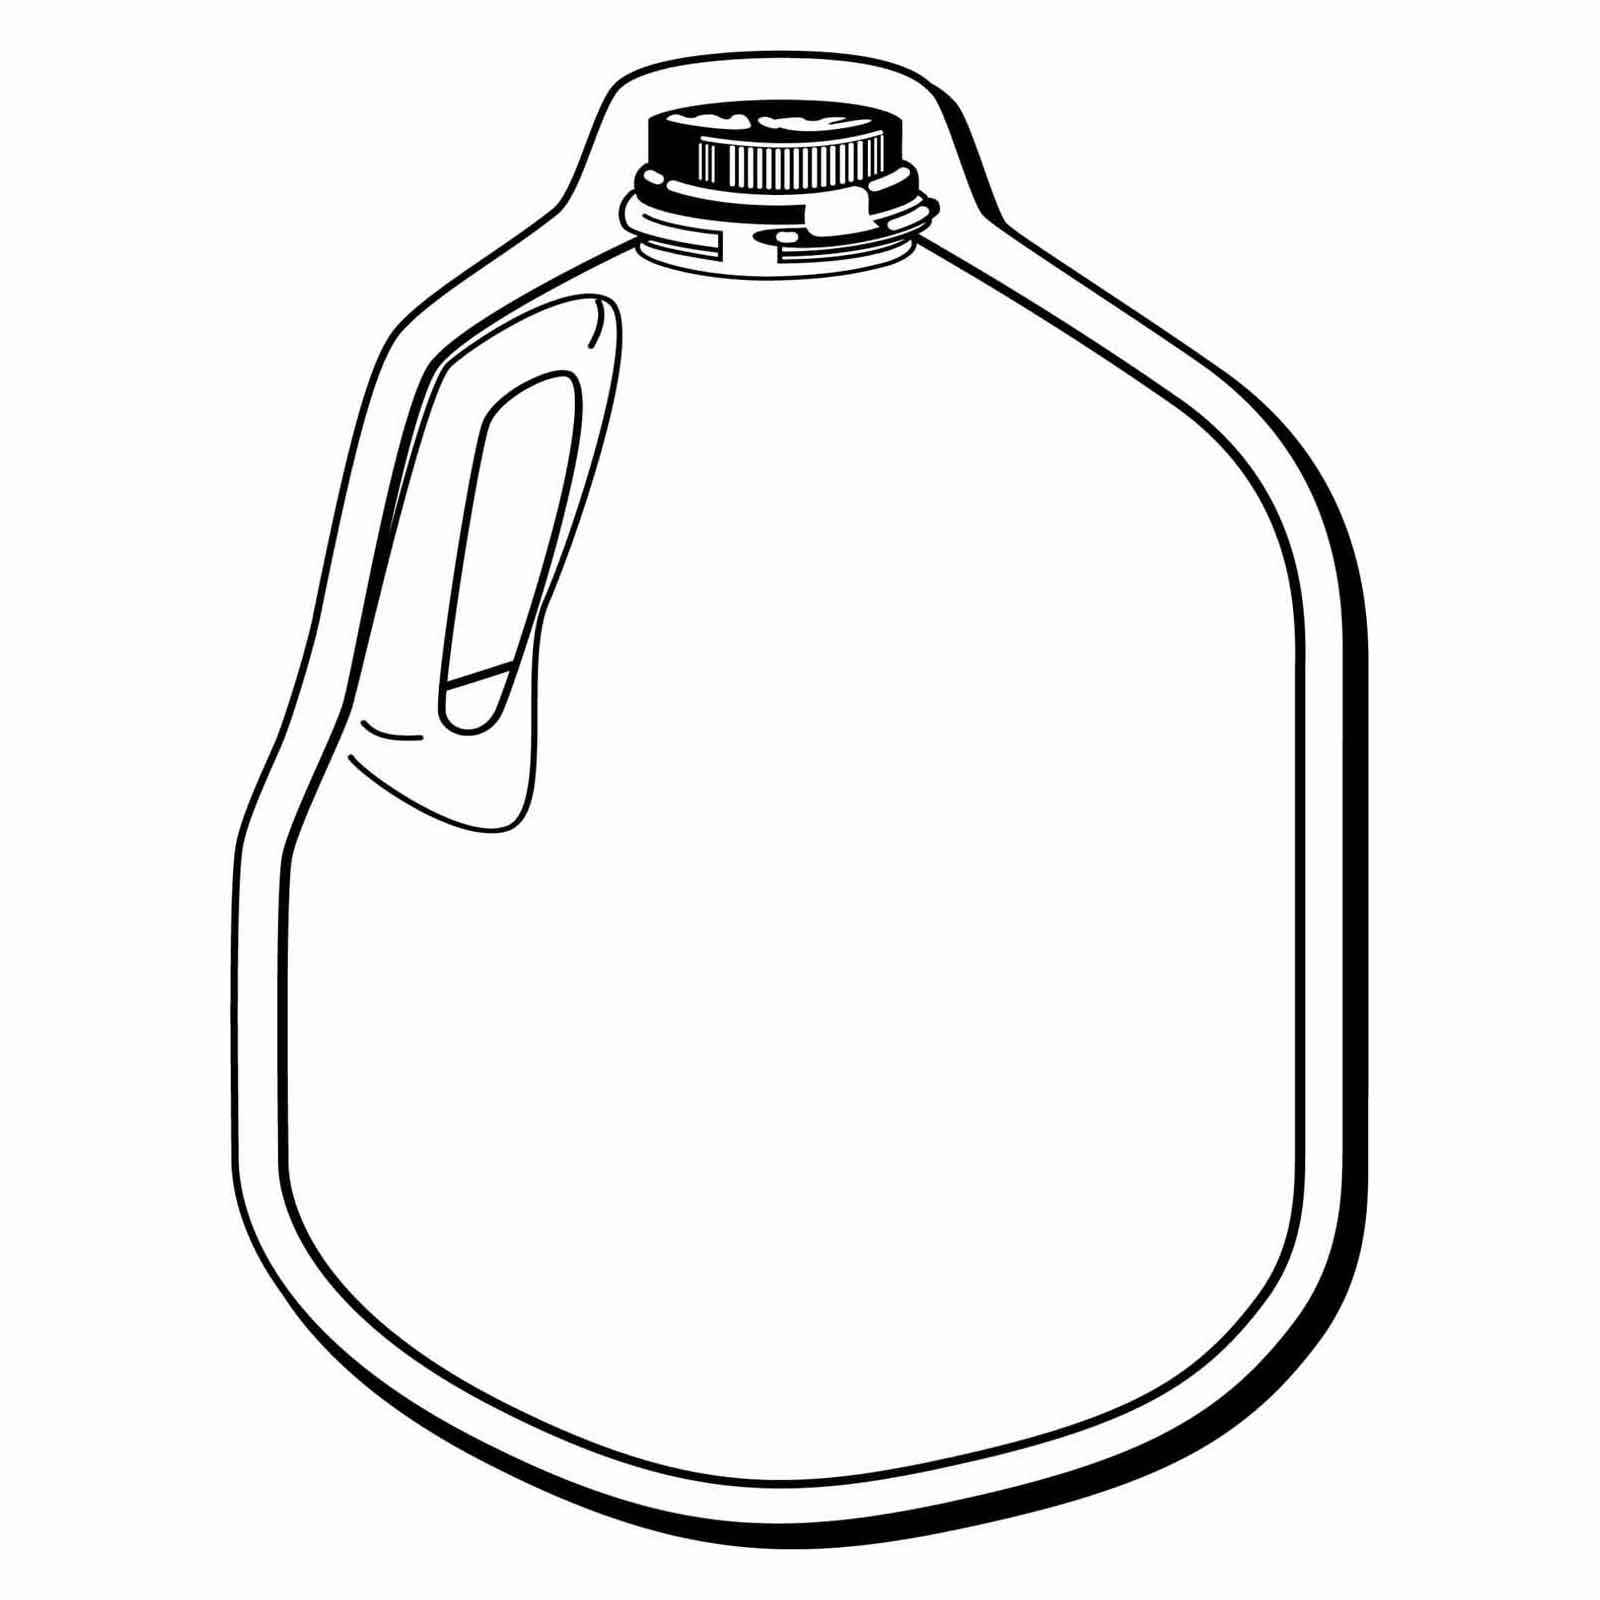 Milk Jug Colouring Pages